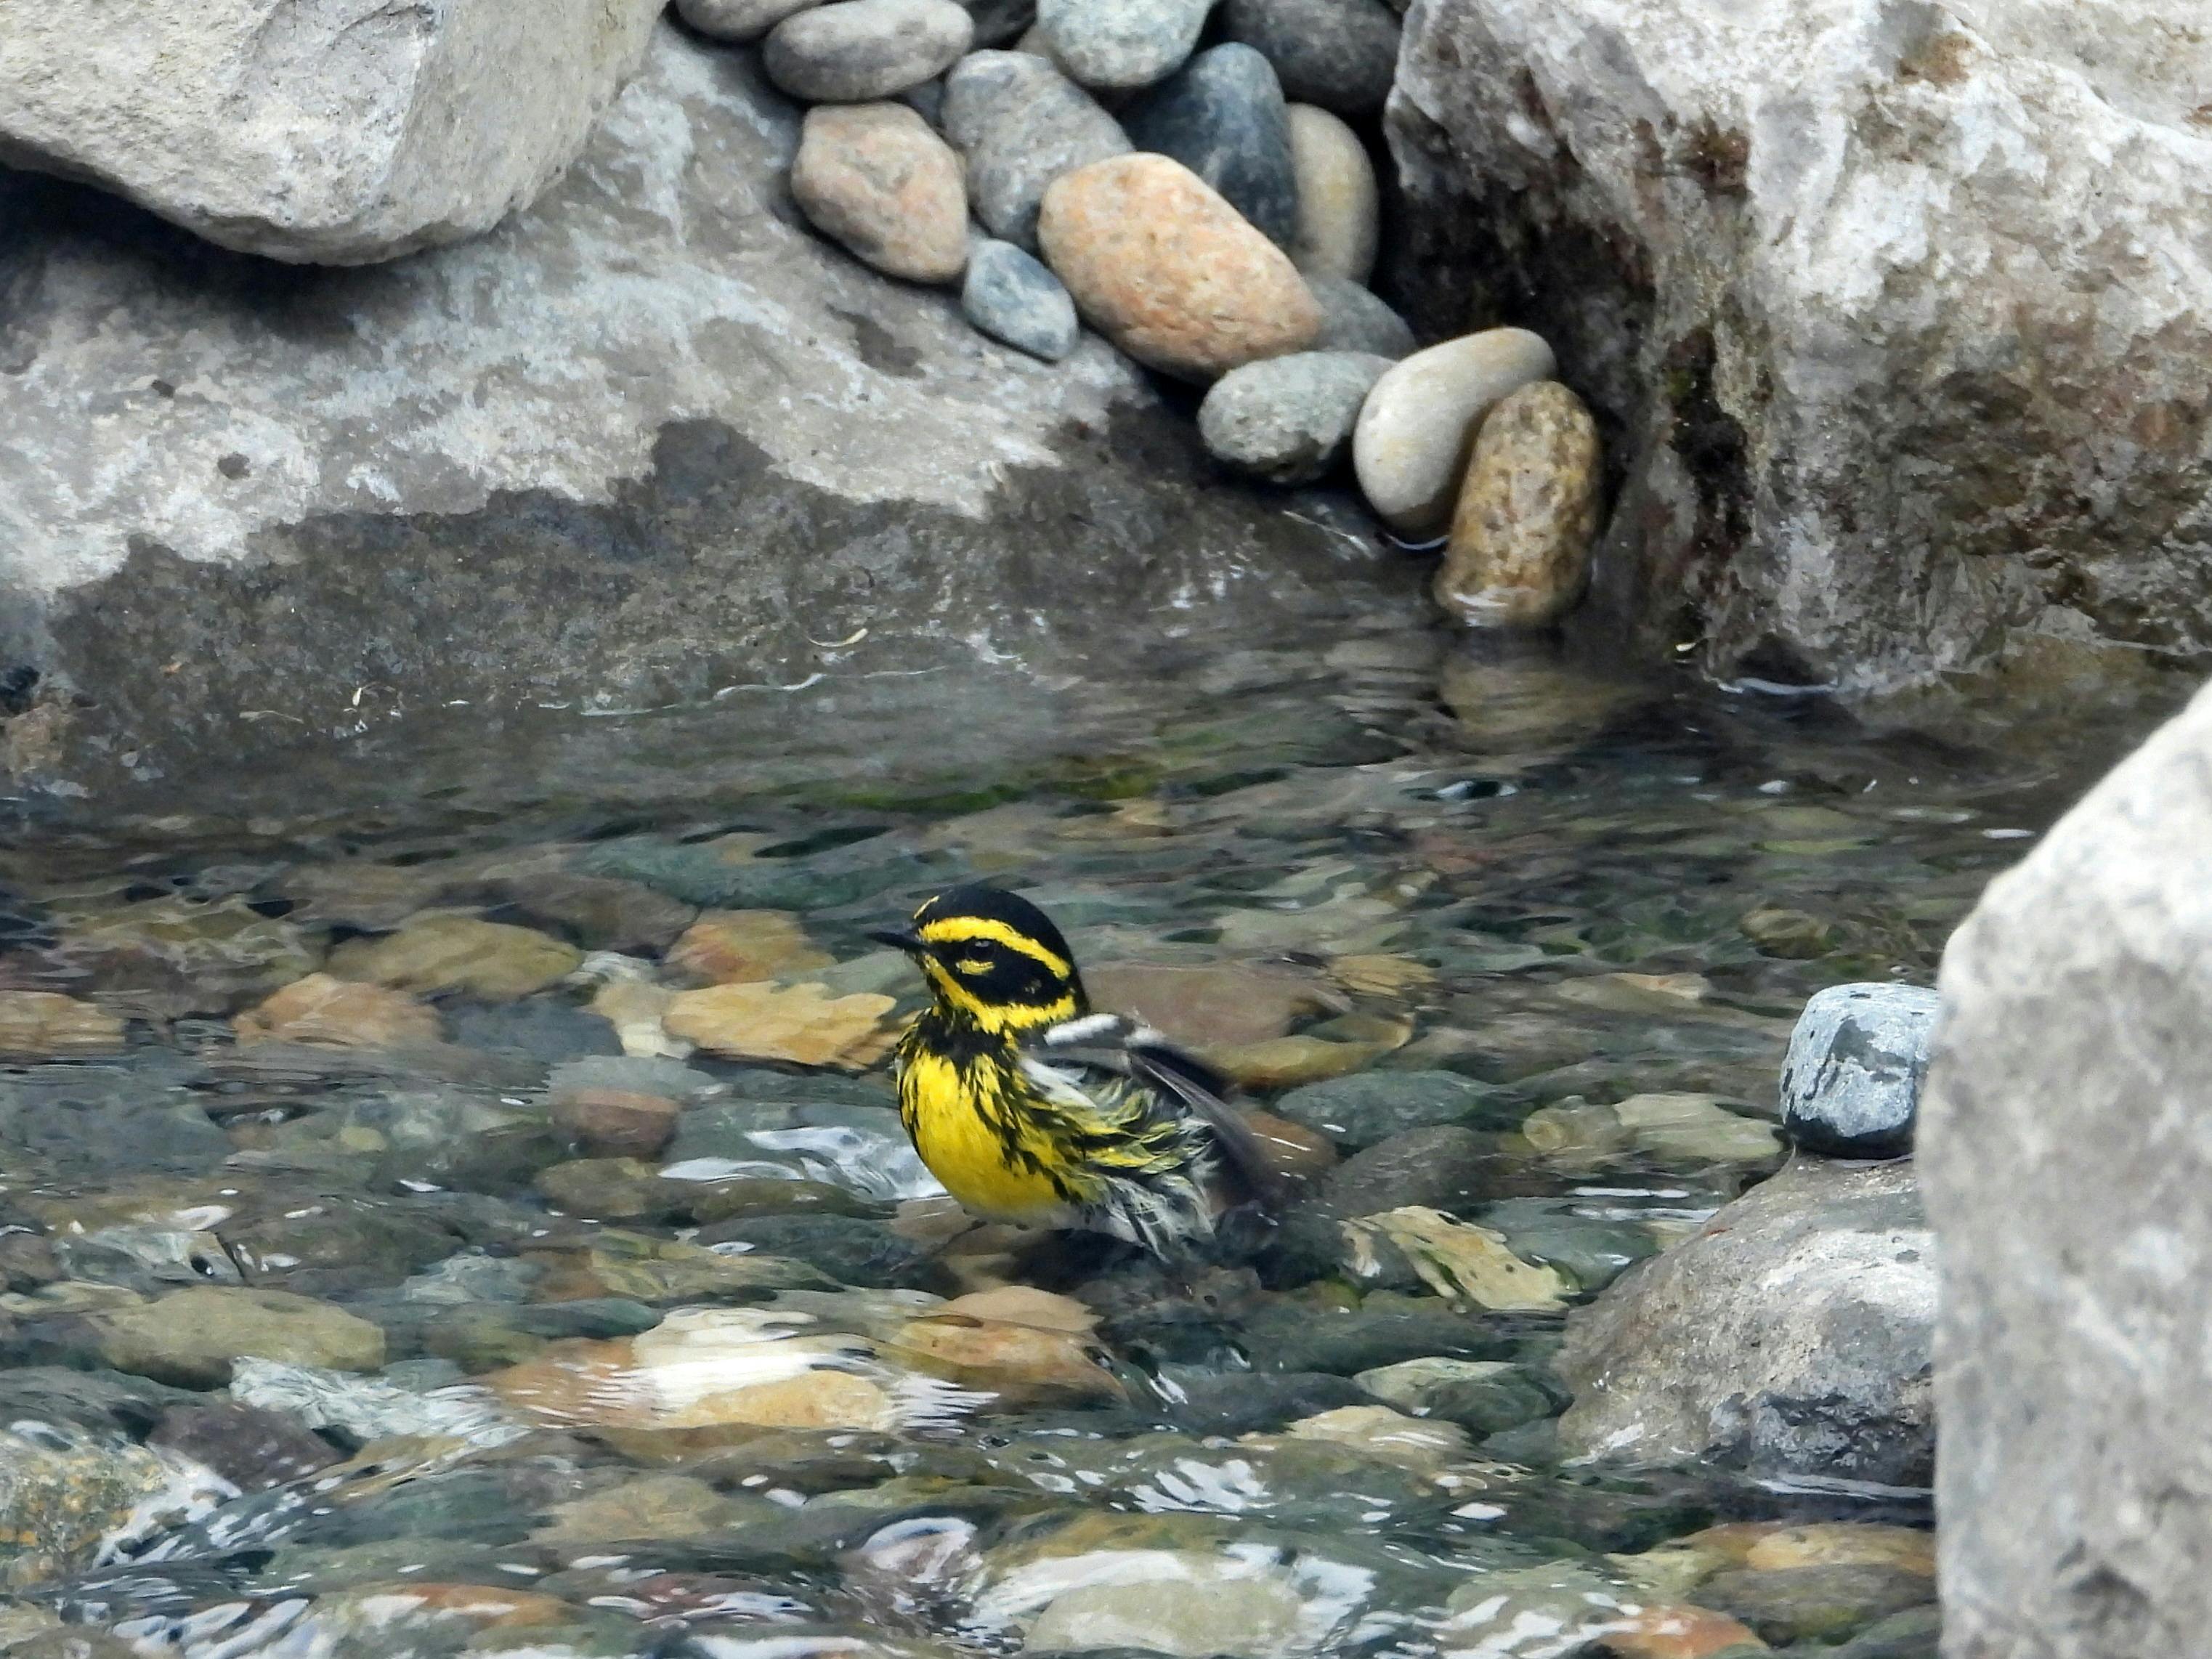 Migrating Townsend's Warbler in Man-made Backyard Stream